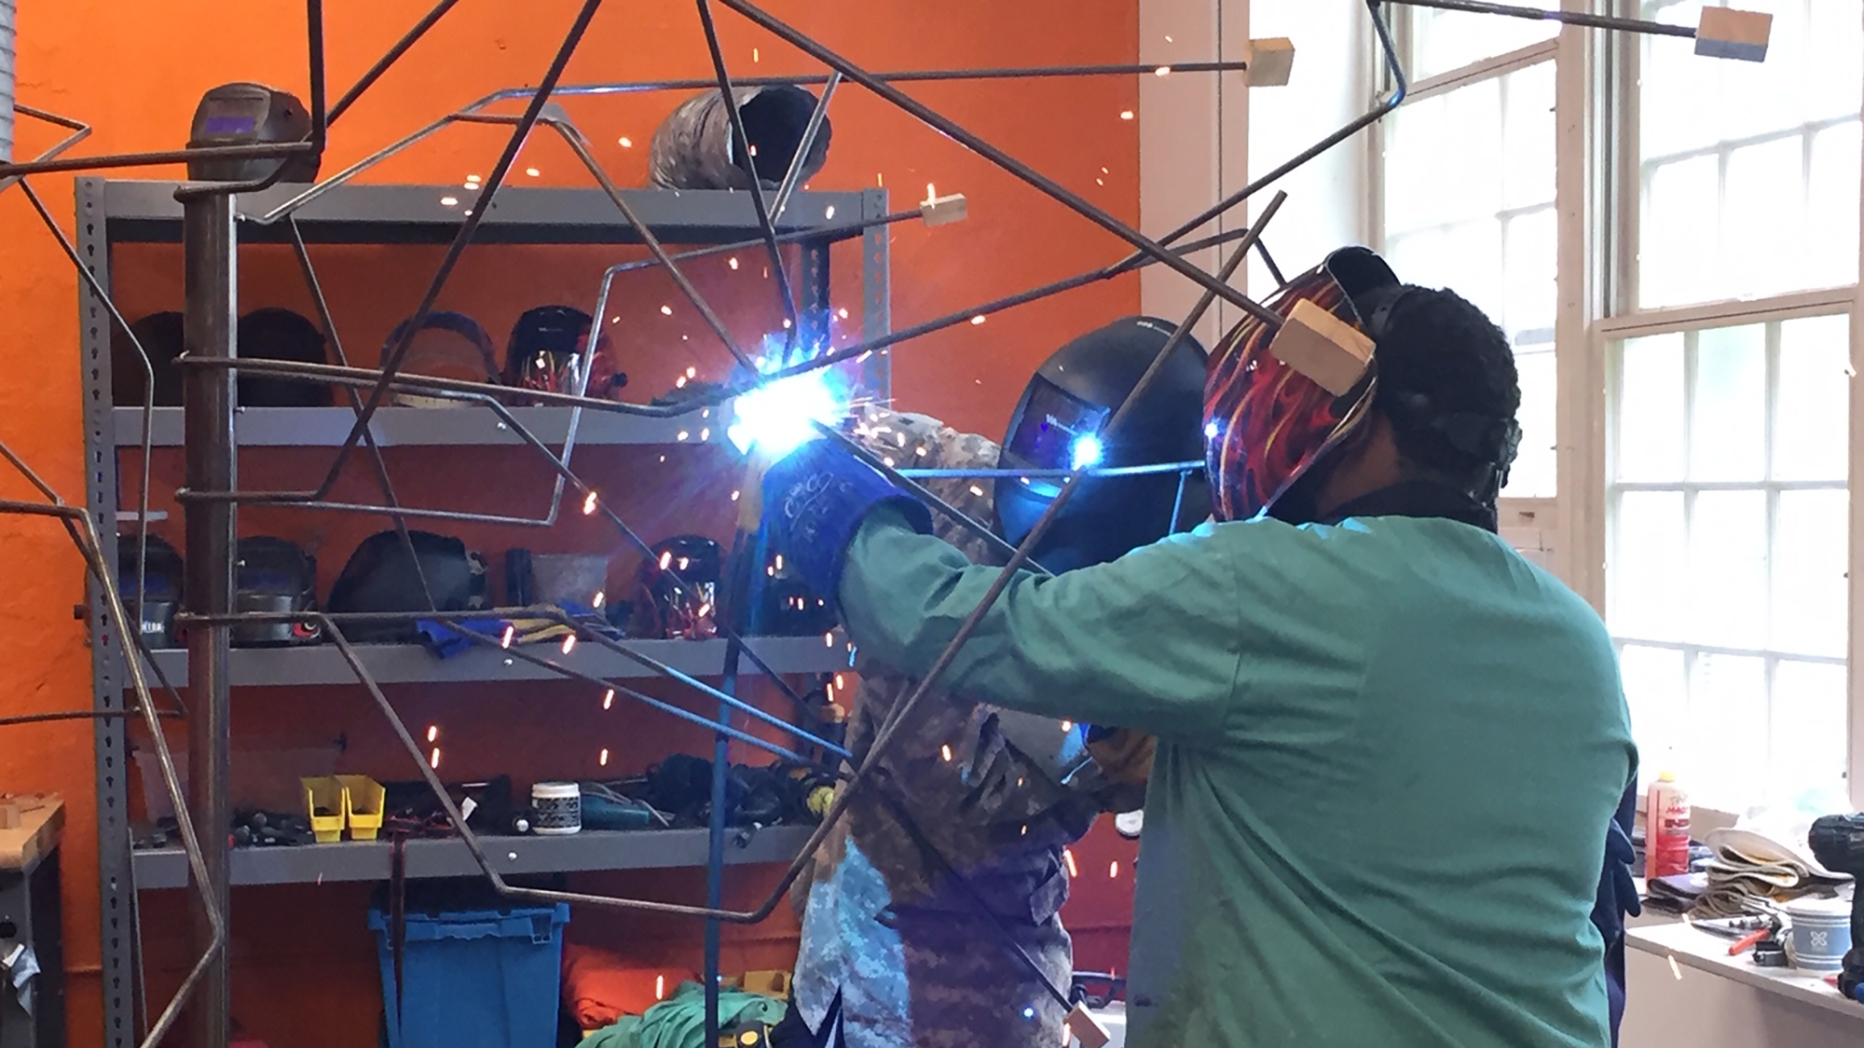 Two students weld parts of a metal structure